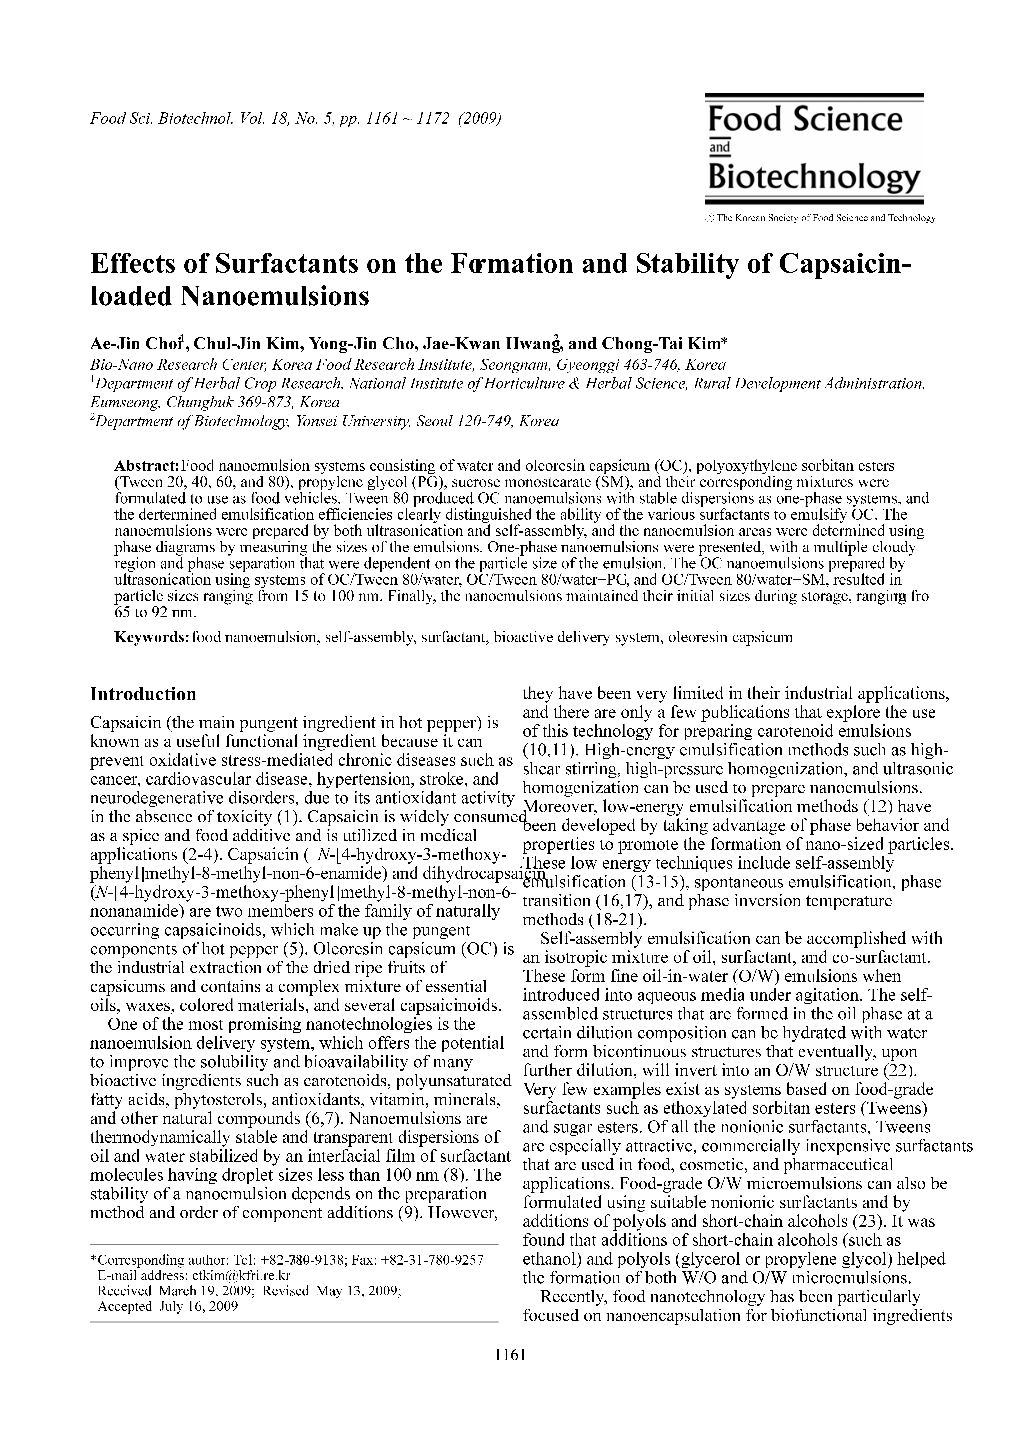 Effects of Surfactants on the Formation and Stability of Capsaicin- Loaded Nanoemulsions